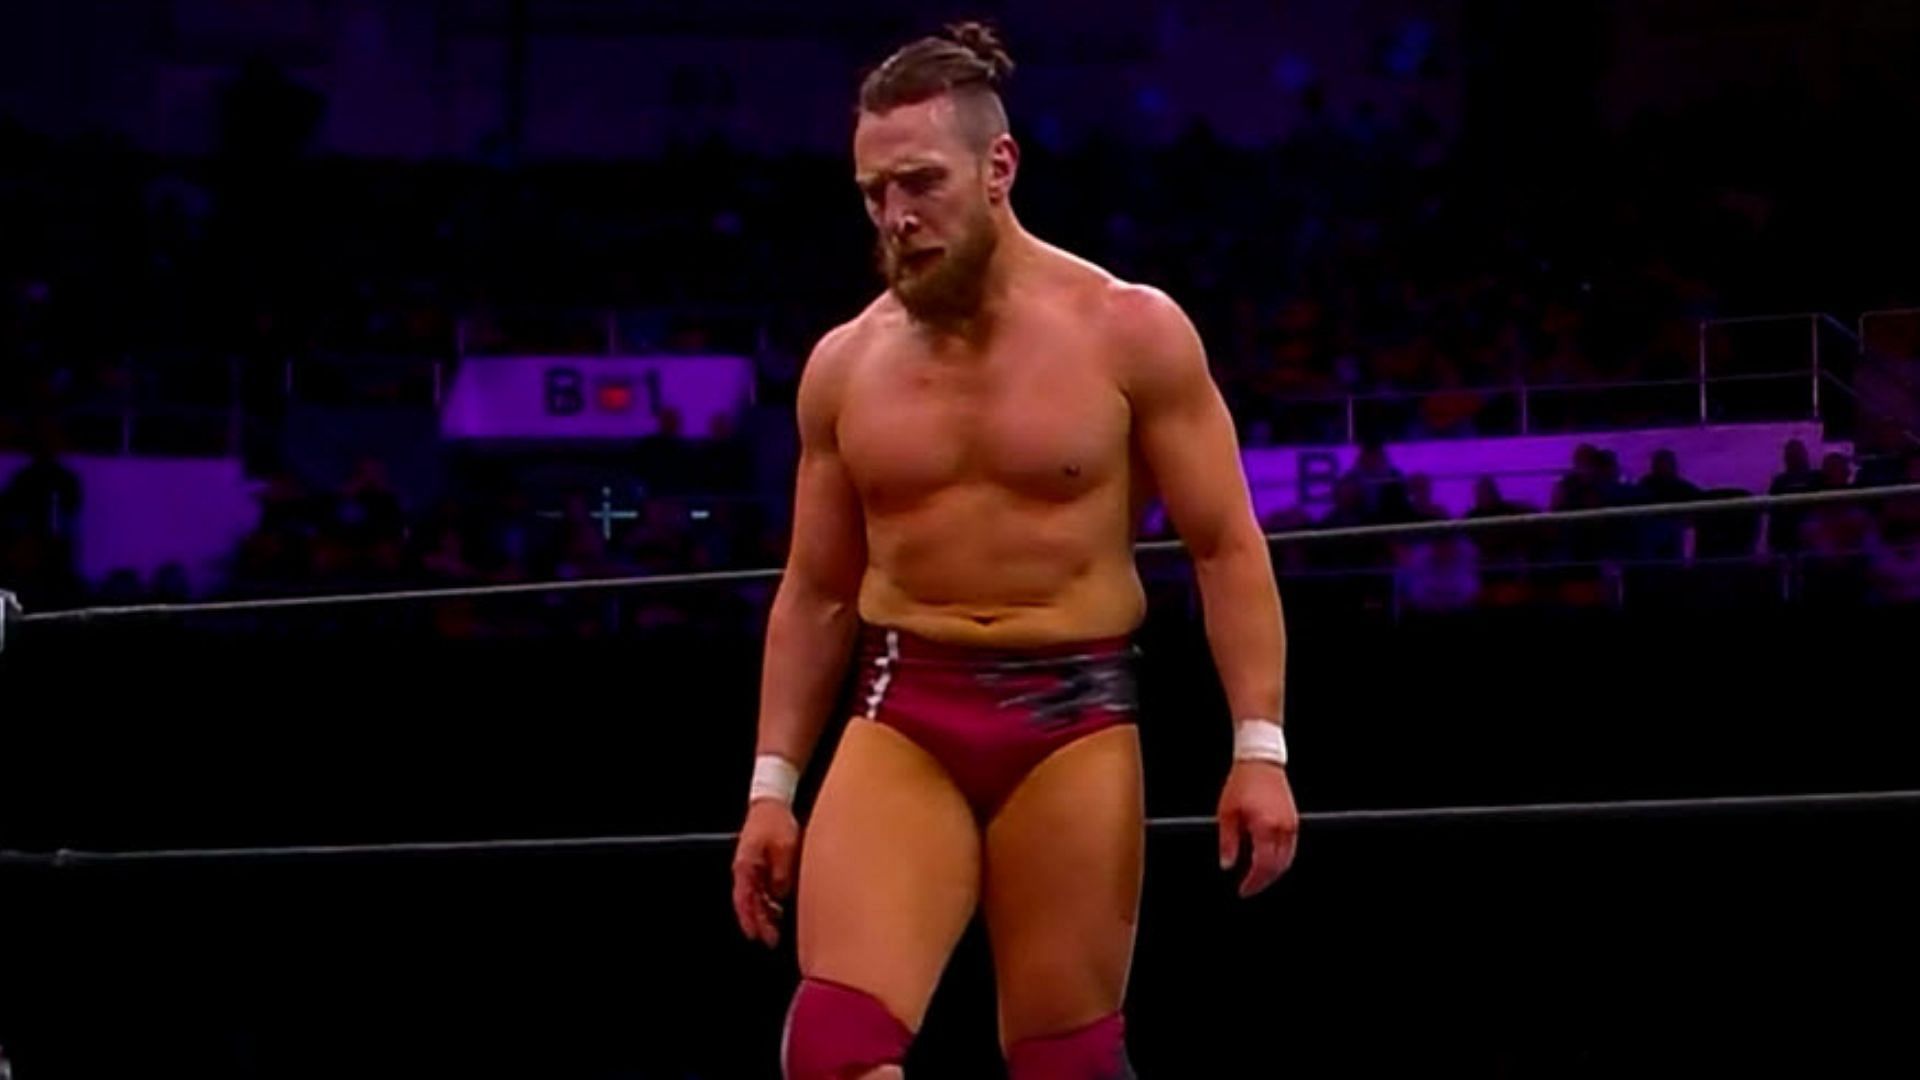 Bryan Danielson during his match with Lee Moriarty on AEW Dynamite